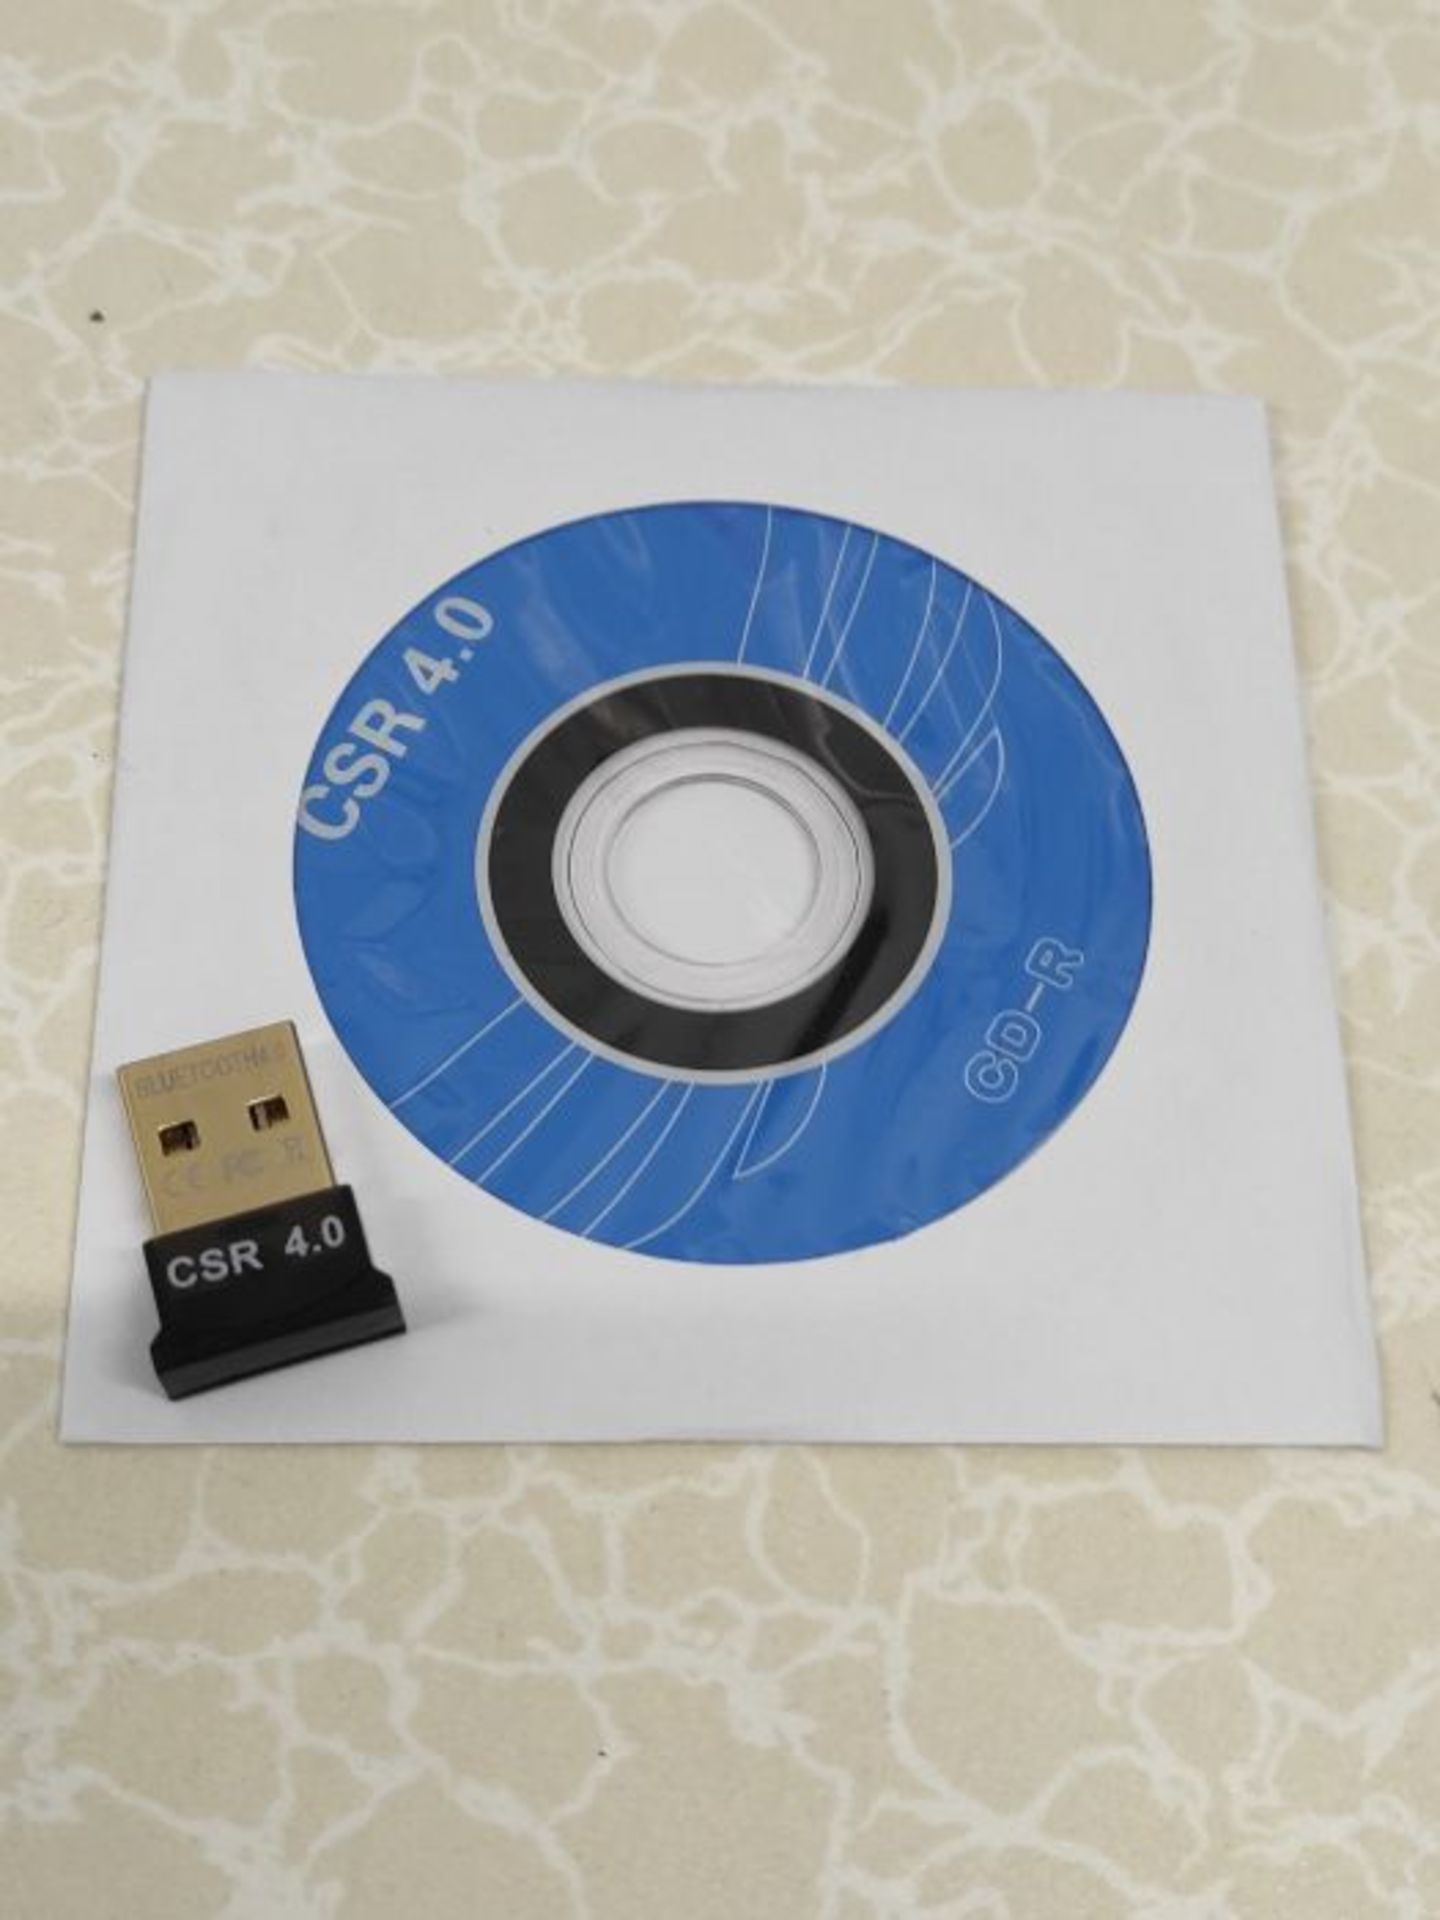 Bluetooth CSR 4.0 Dongle USB Adapter Plug and Play For For Windows 10 / 8.1 / 8 / 7 ¡ - Image 3 of 3